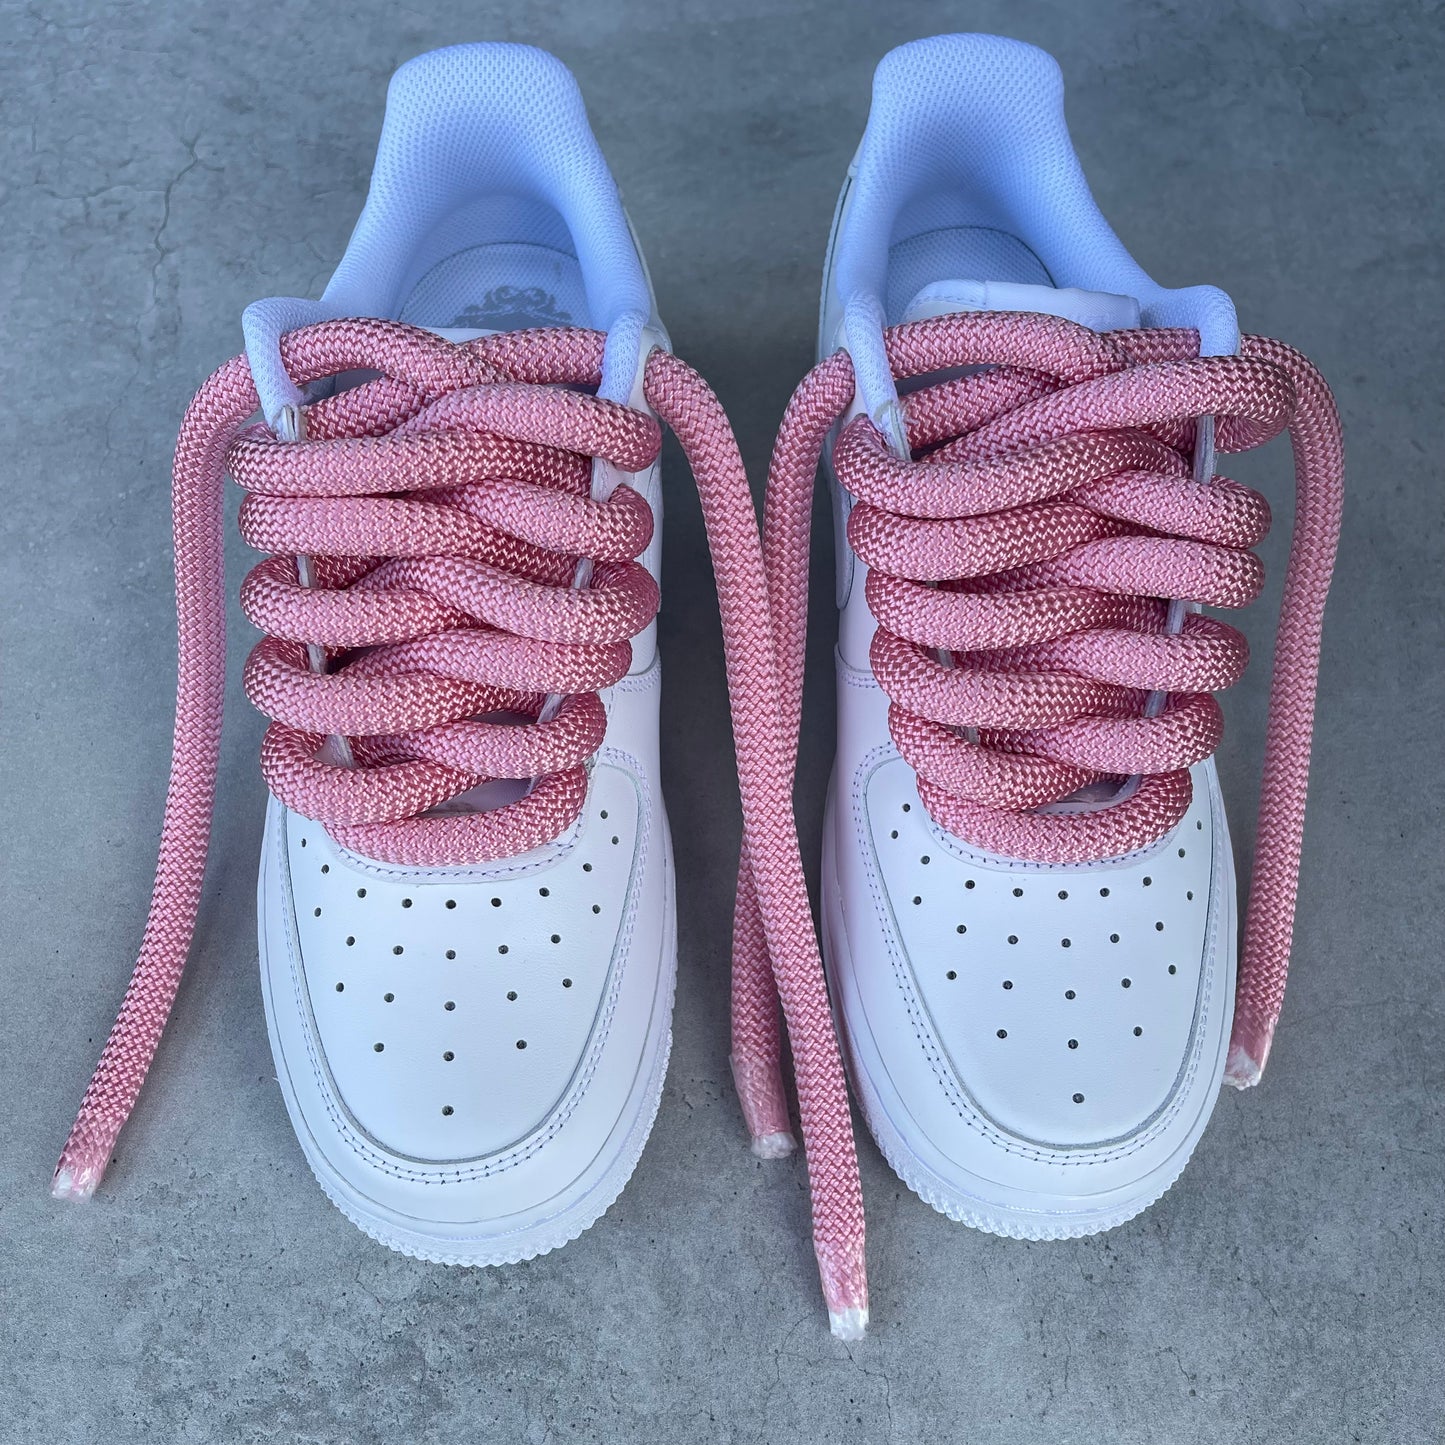 Custom AIR FORCE 1 - Rope laces 2.0 (pink)